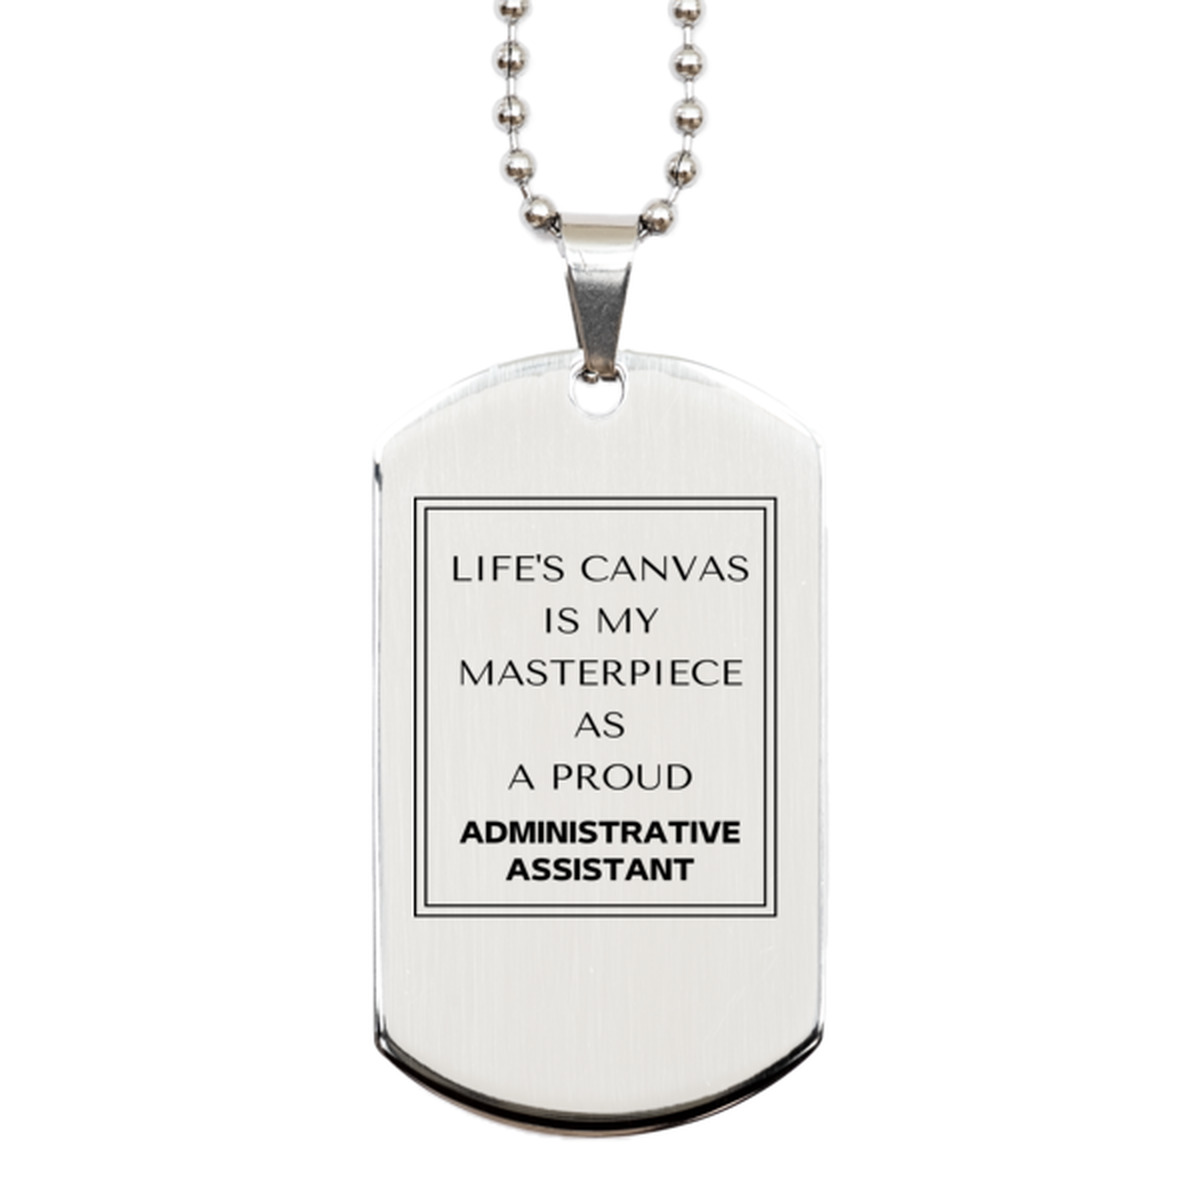 Proud Administrative Assistant Gifts, Life's canvas is my masterpiece, Epic Birthday Christmas Unique Silver Dog Tag For Administrative Assistant, Coworkers, Men, Women, Friends